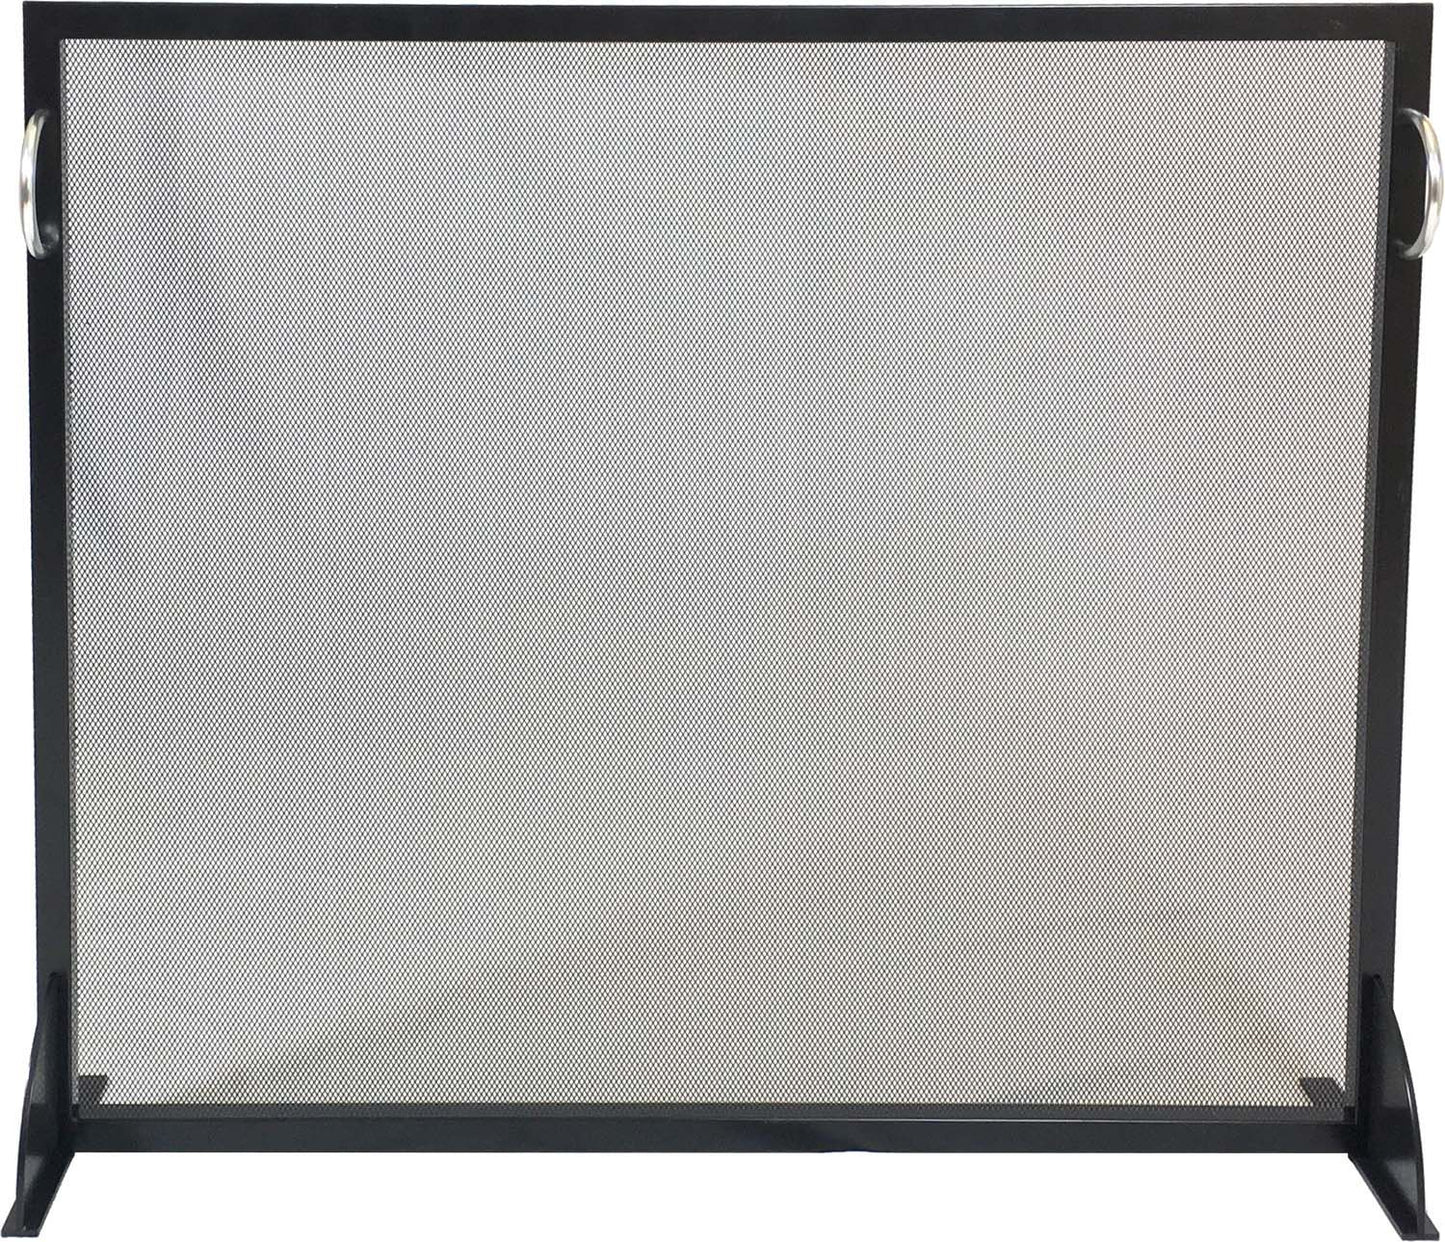 Dagan Industries 38" x 32" Black Wrought Iron and Stainless Steel Fireplace Screen